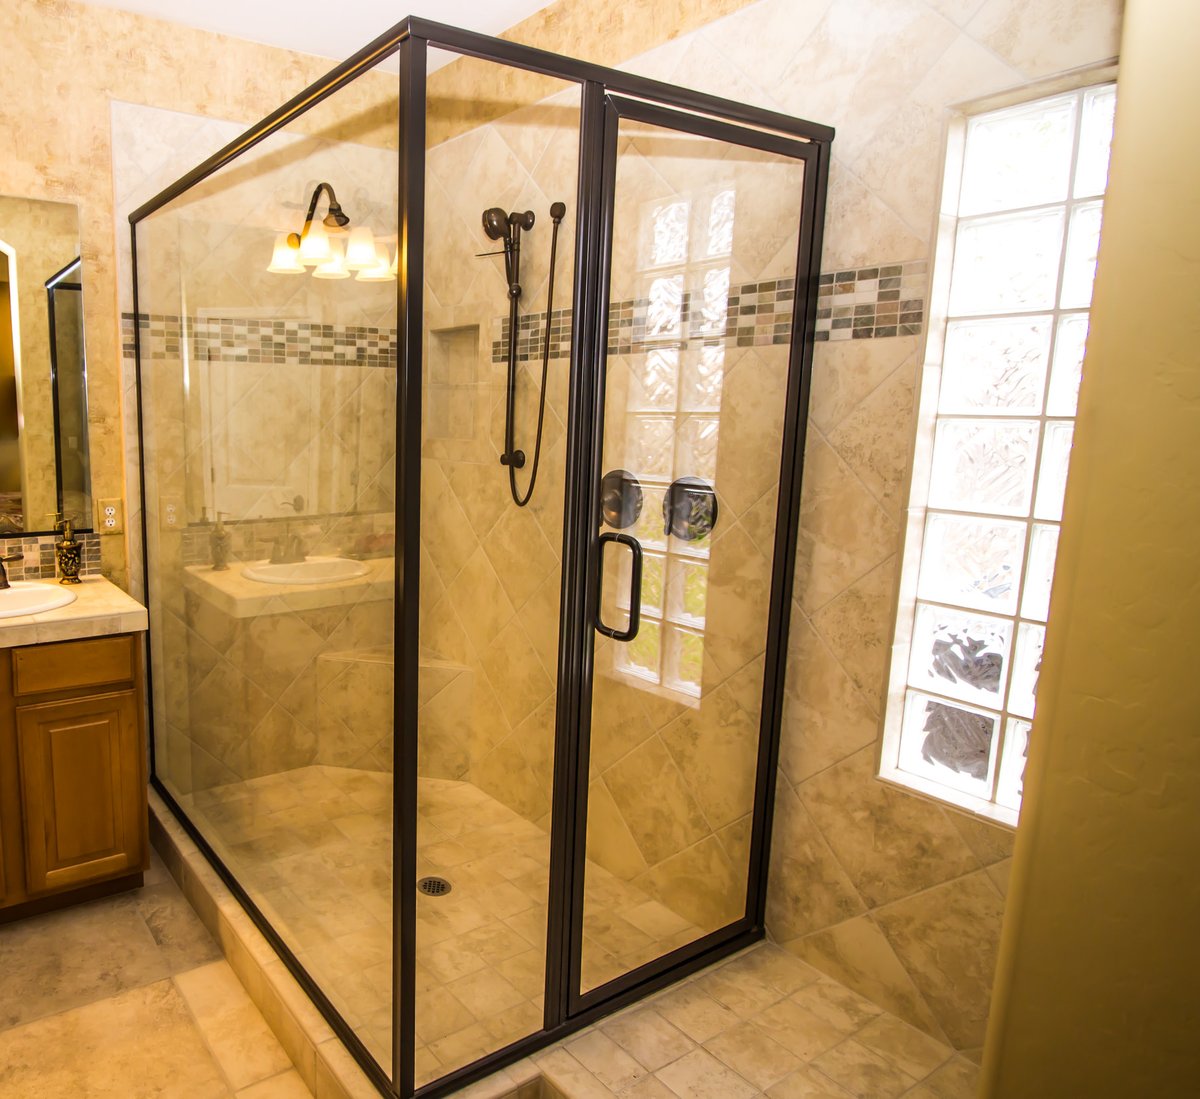 #MaccsGlass provides our clients with comprehensive #shower door services including installation, repair, and replacement. Contact us today to set up a free estimate and see what we can do for you. (904) 259-6070